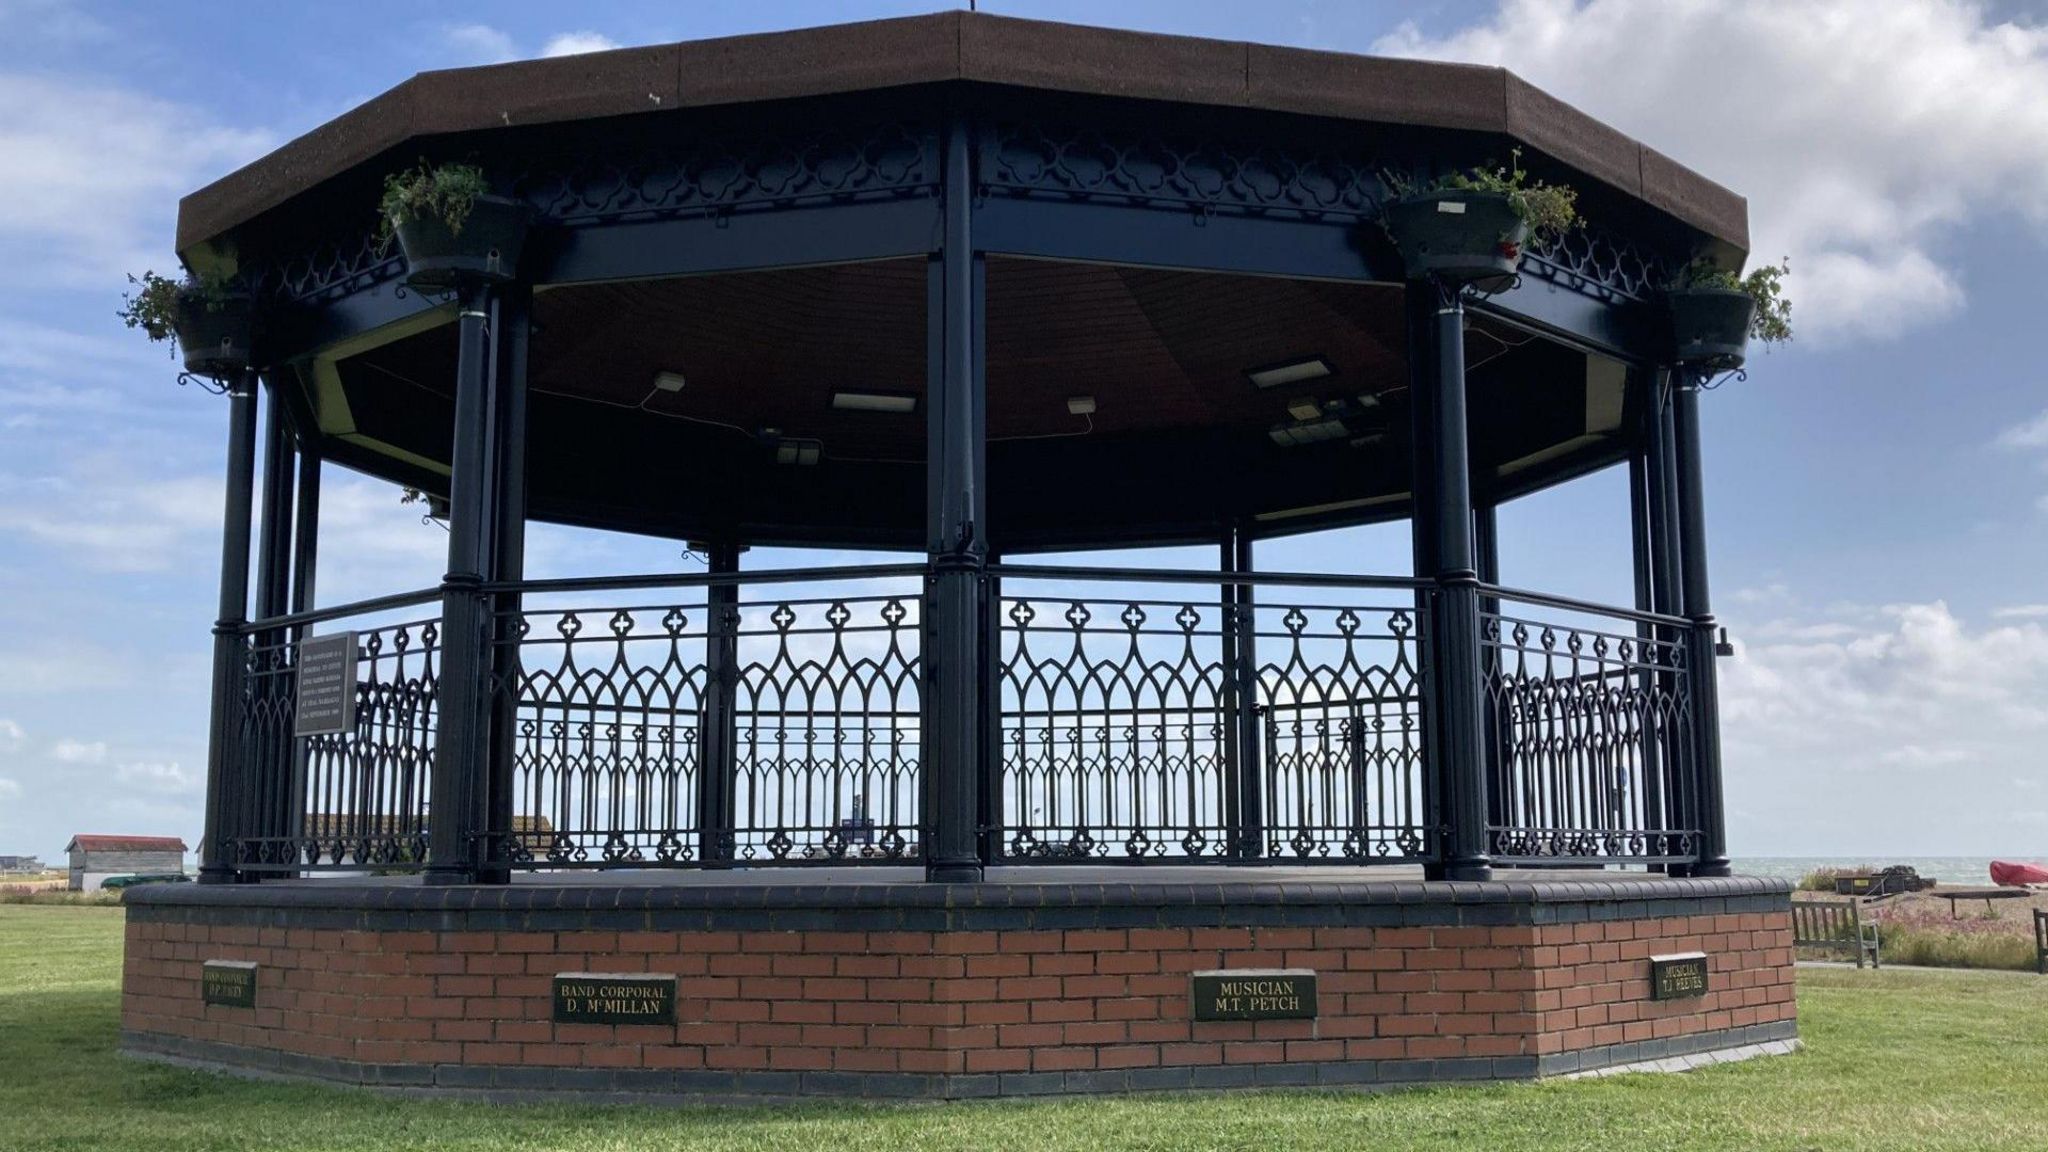 The Royal Marines memorial bandstand on Walmer Green, Deal